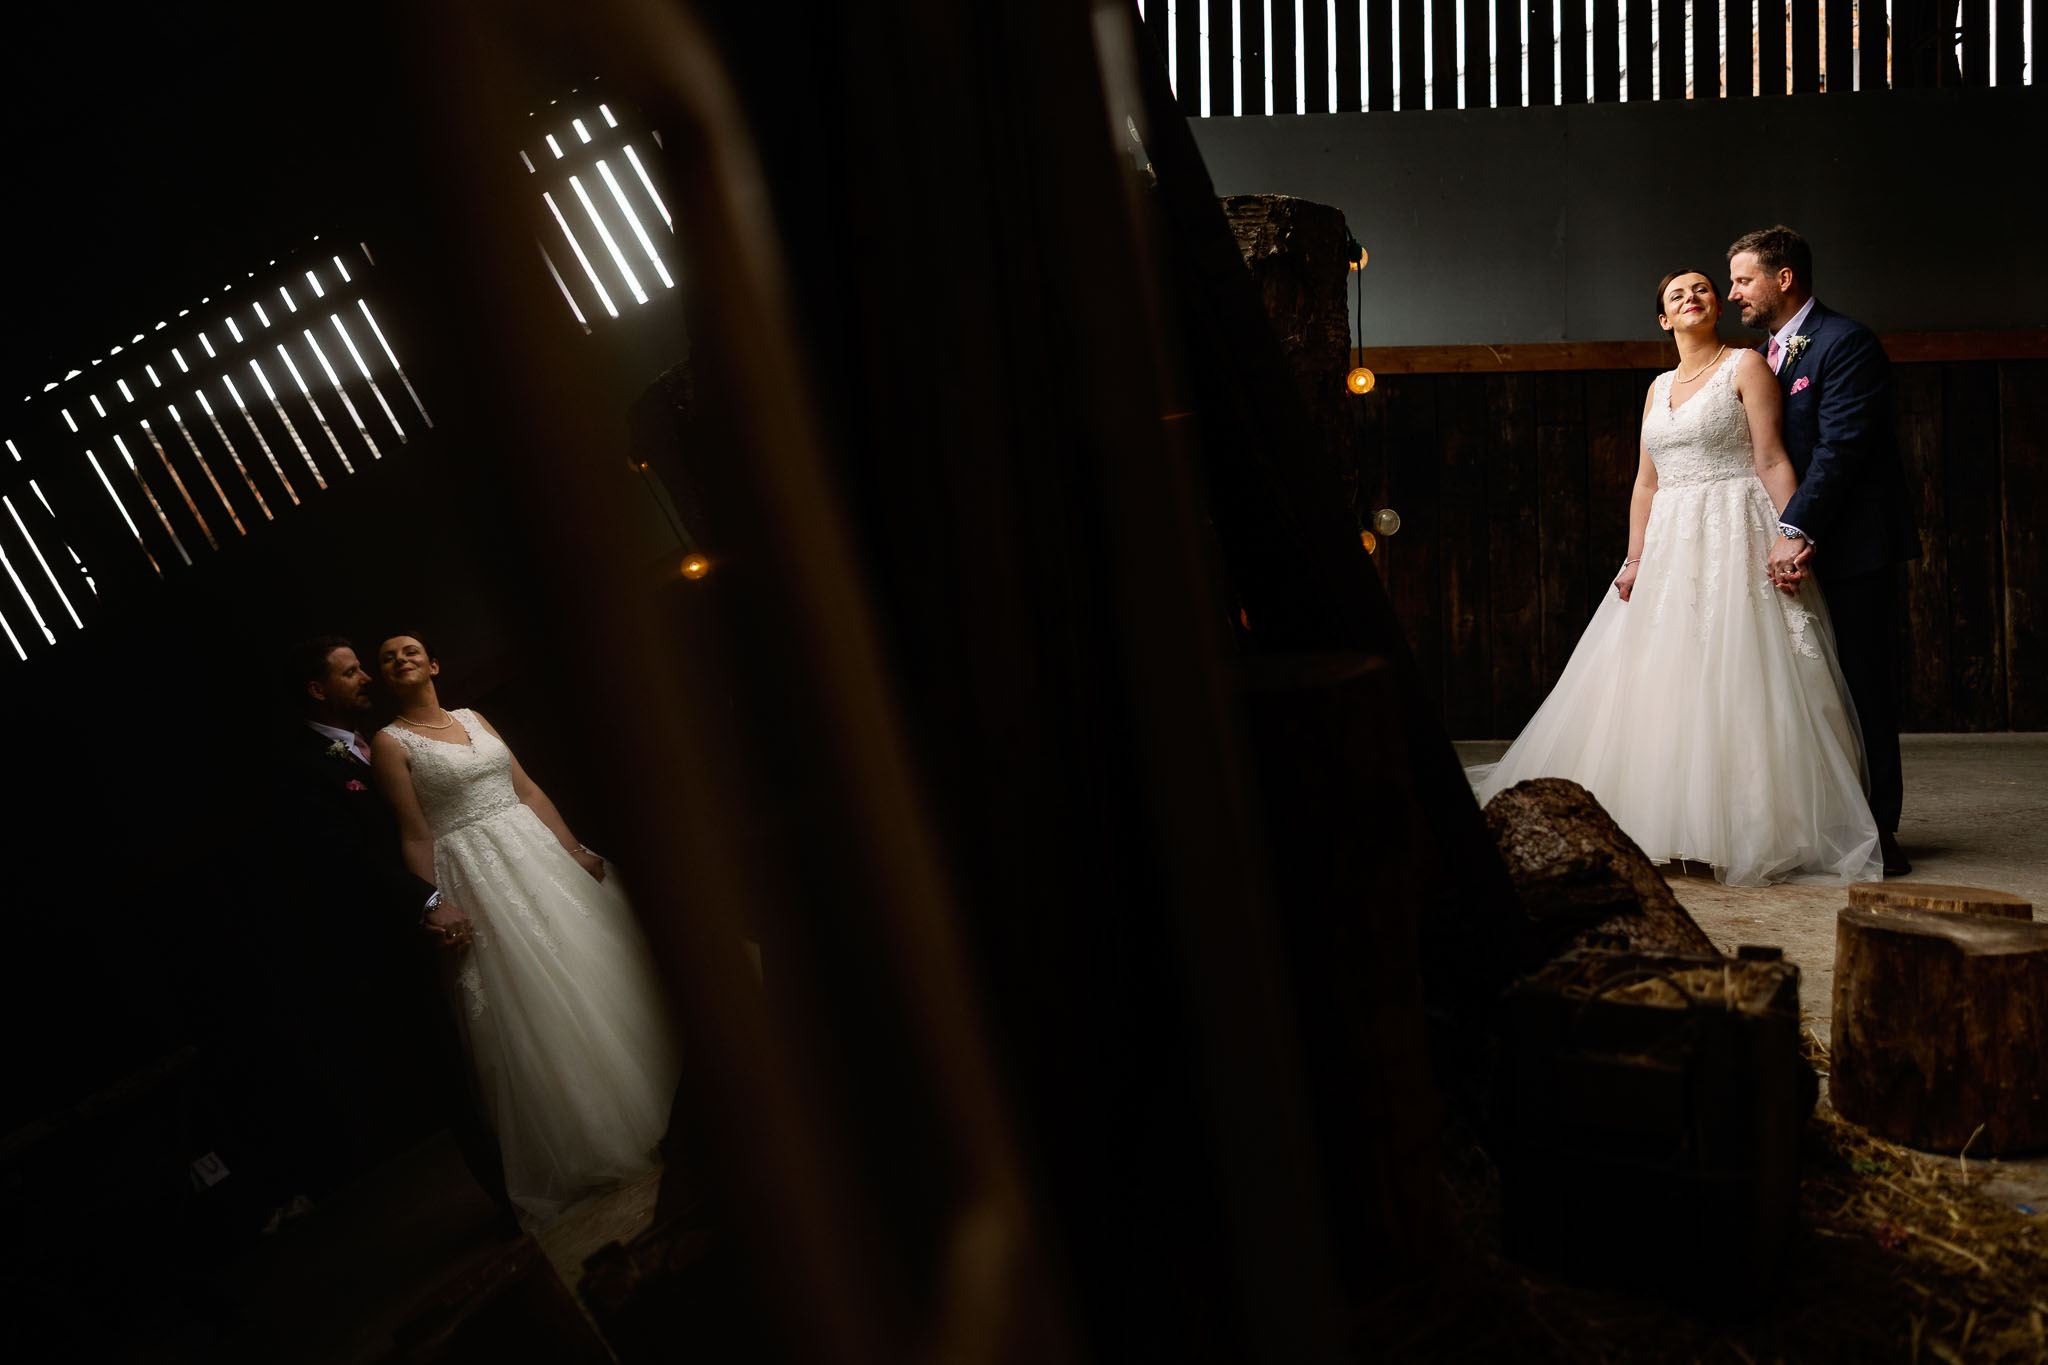 Amazing Wedding Pictures at a Barn Wedding 